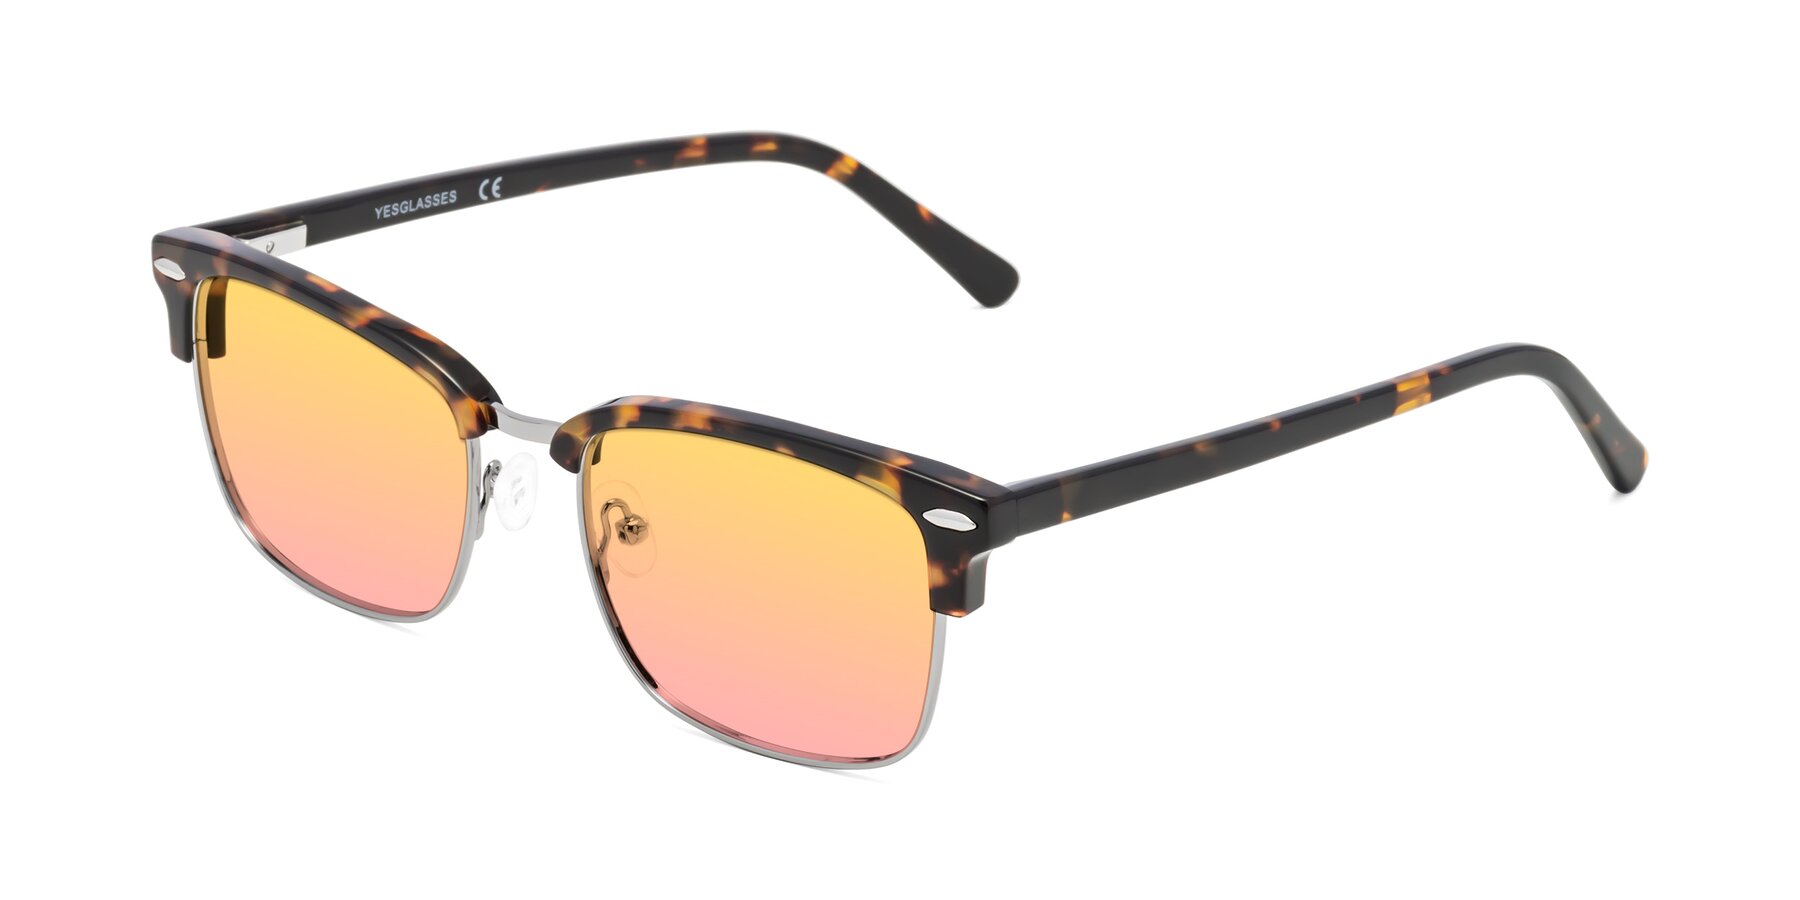 Angle of 17464 in Tortoise/ Gunmetal with Yellow / Pink Gradient Lenses